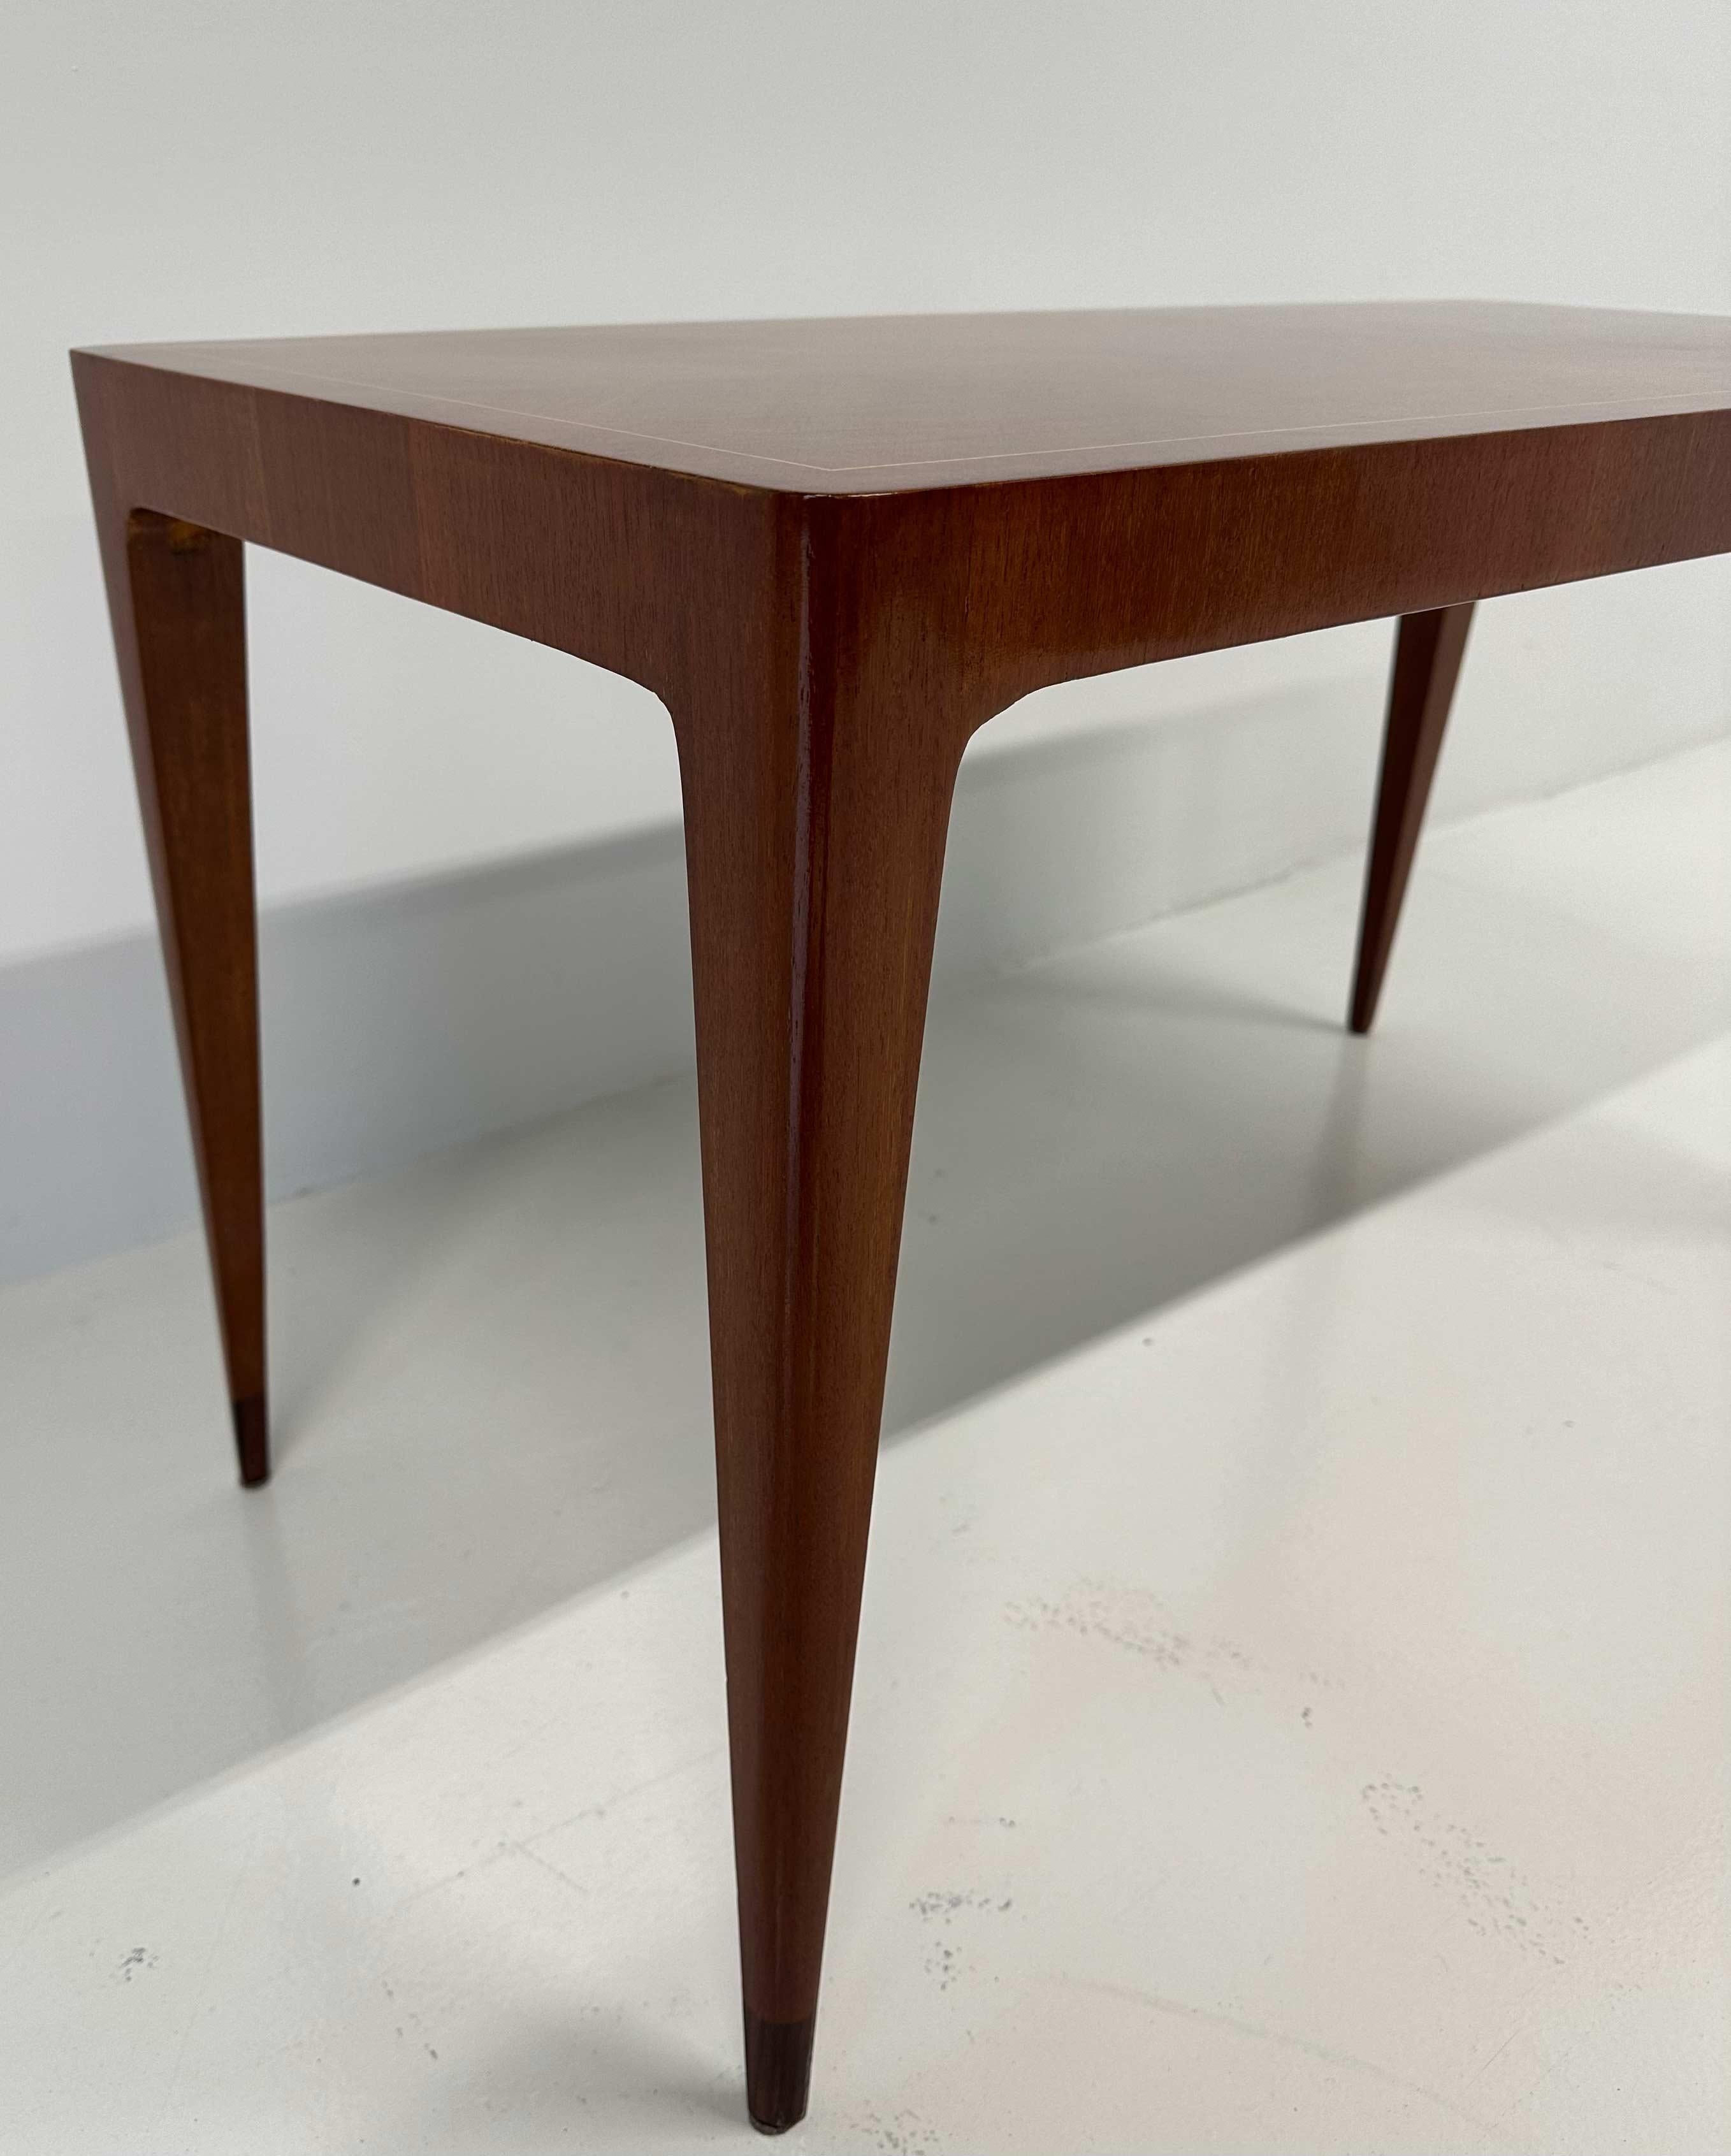 Italian Art Deco Teak and Maple Coffee Table By Paolo Buffa , 1950s For Sale 2